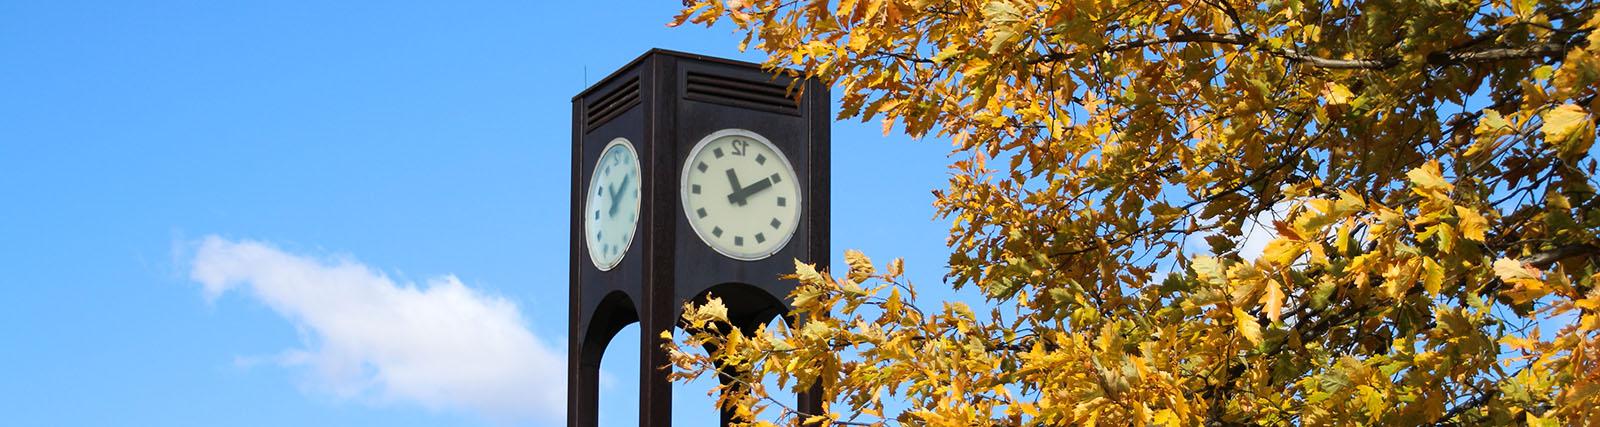 the clock tower as seen through golden fall leaves